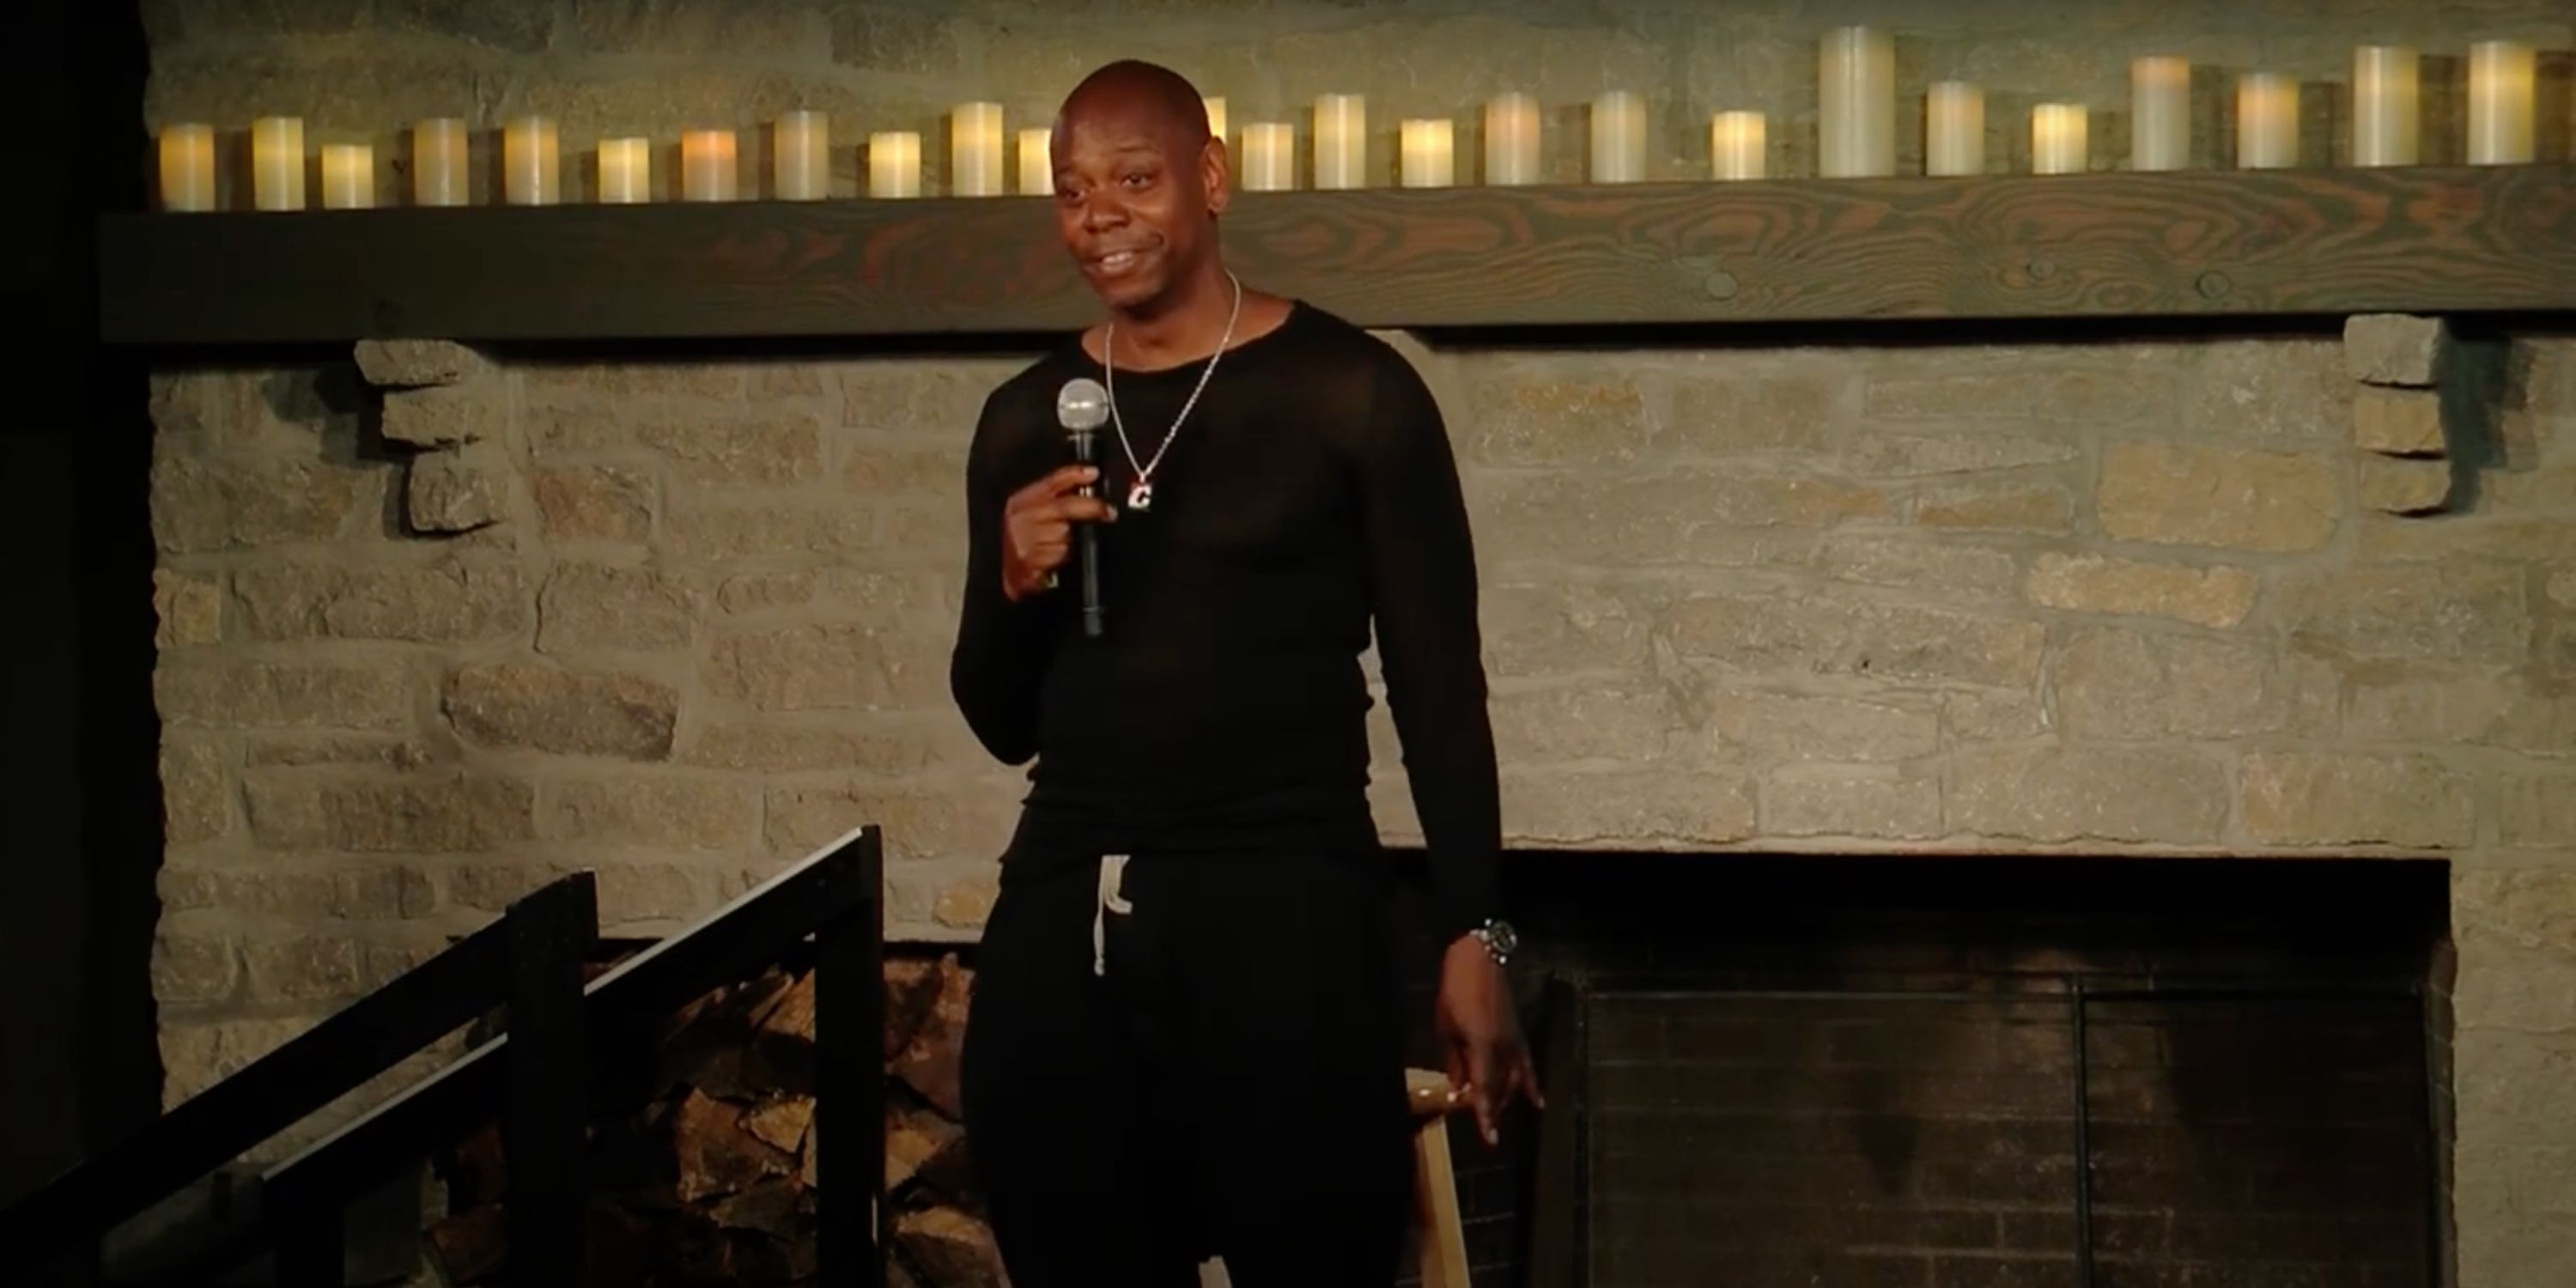 Dave Chappelle in 8:46 - Dave Chappelle on Netflix